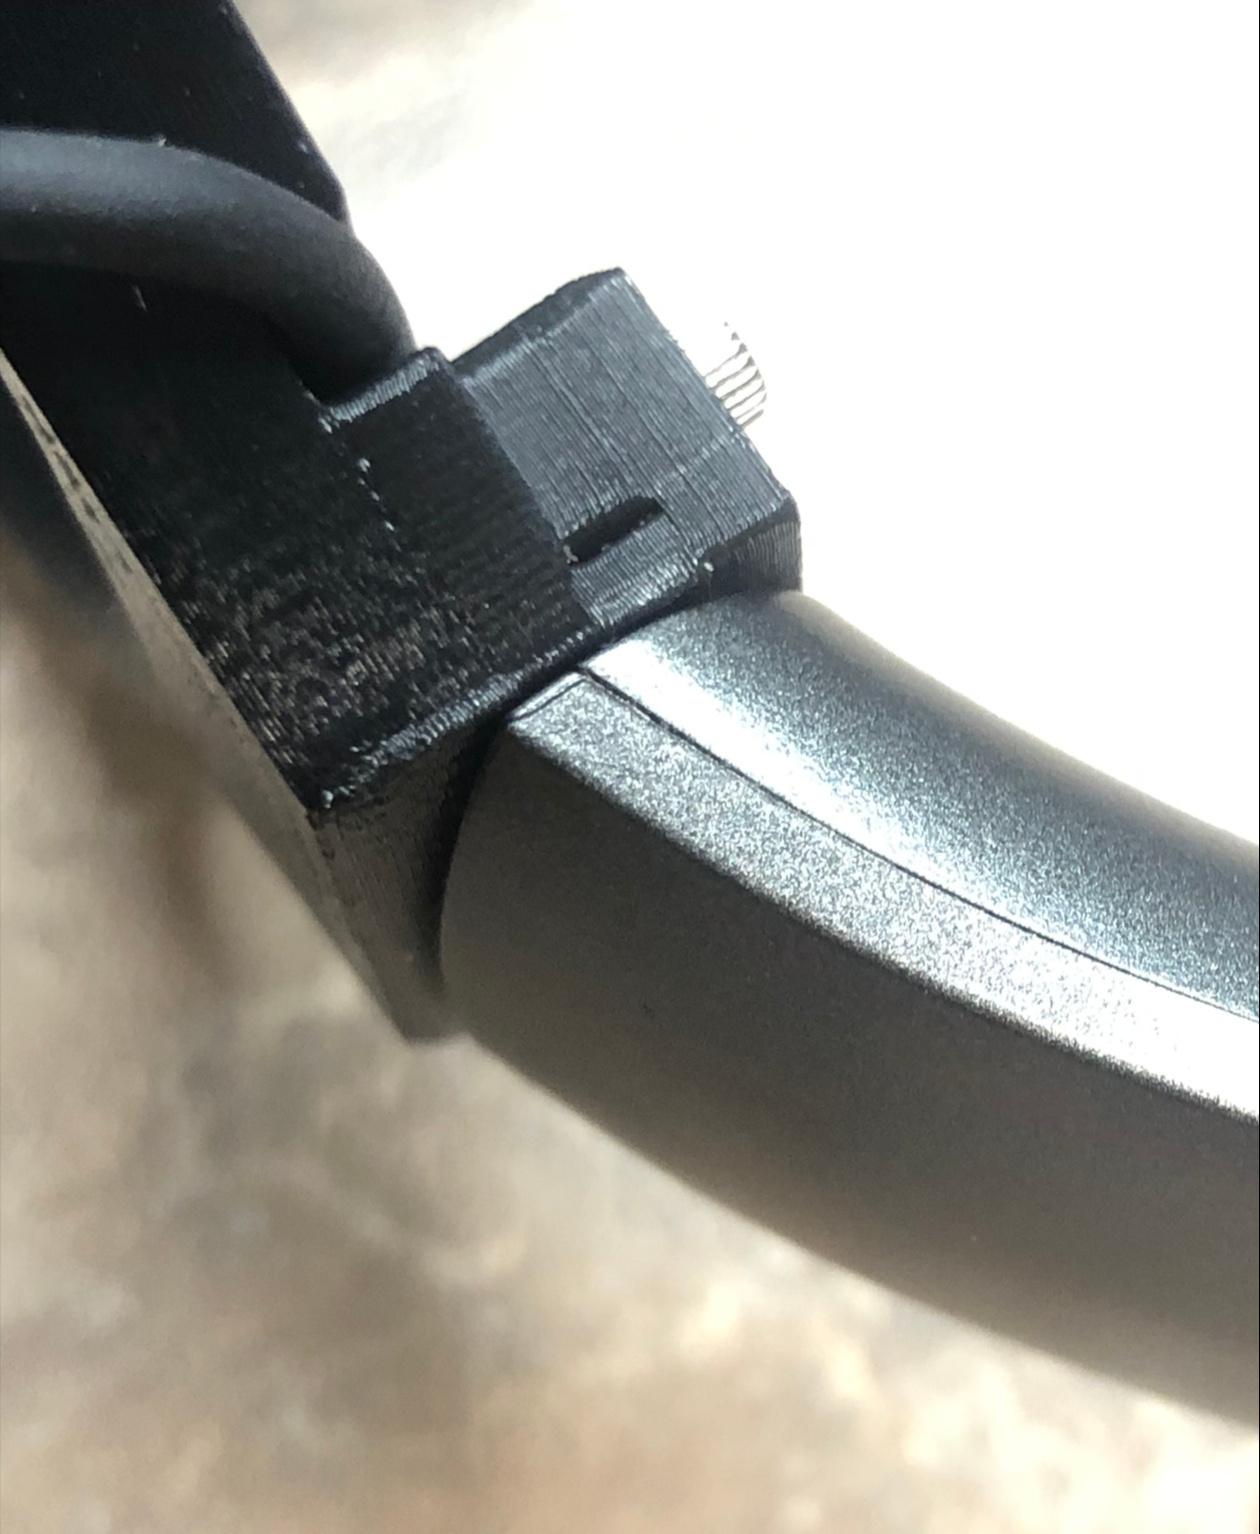 Monoprice BT-600ANC Headphone Arm Replacement - Printed and attached, no ear cup - 3d model